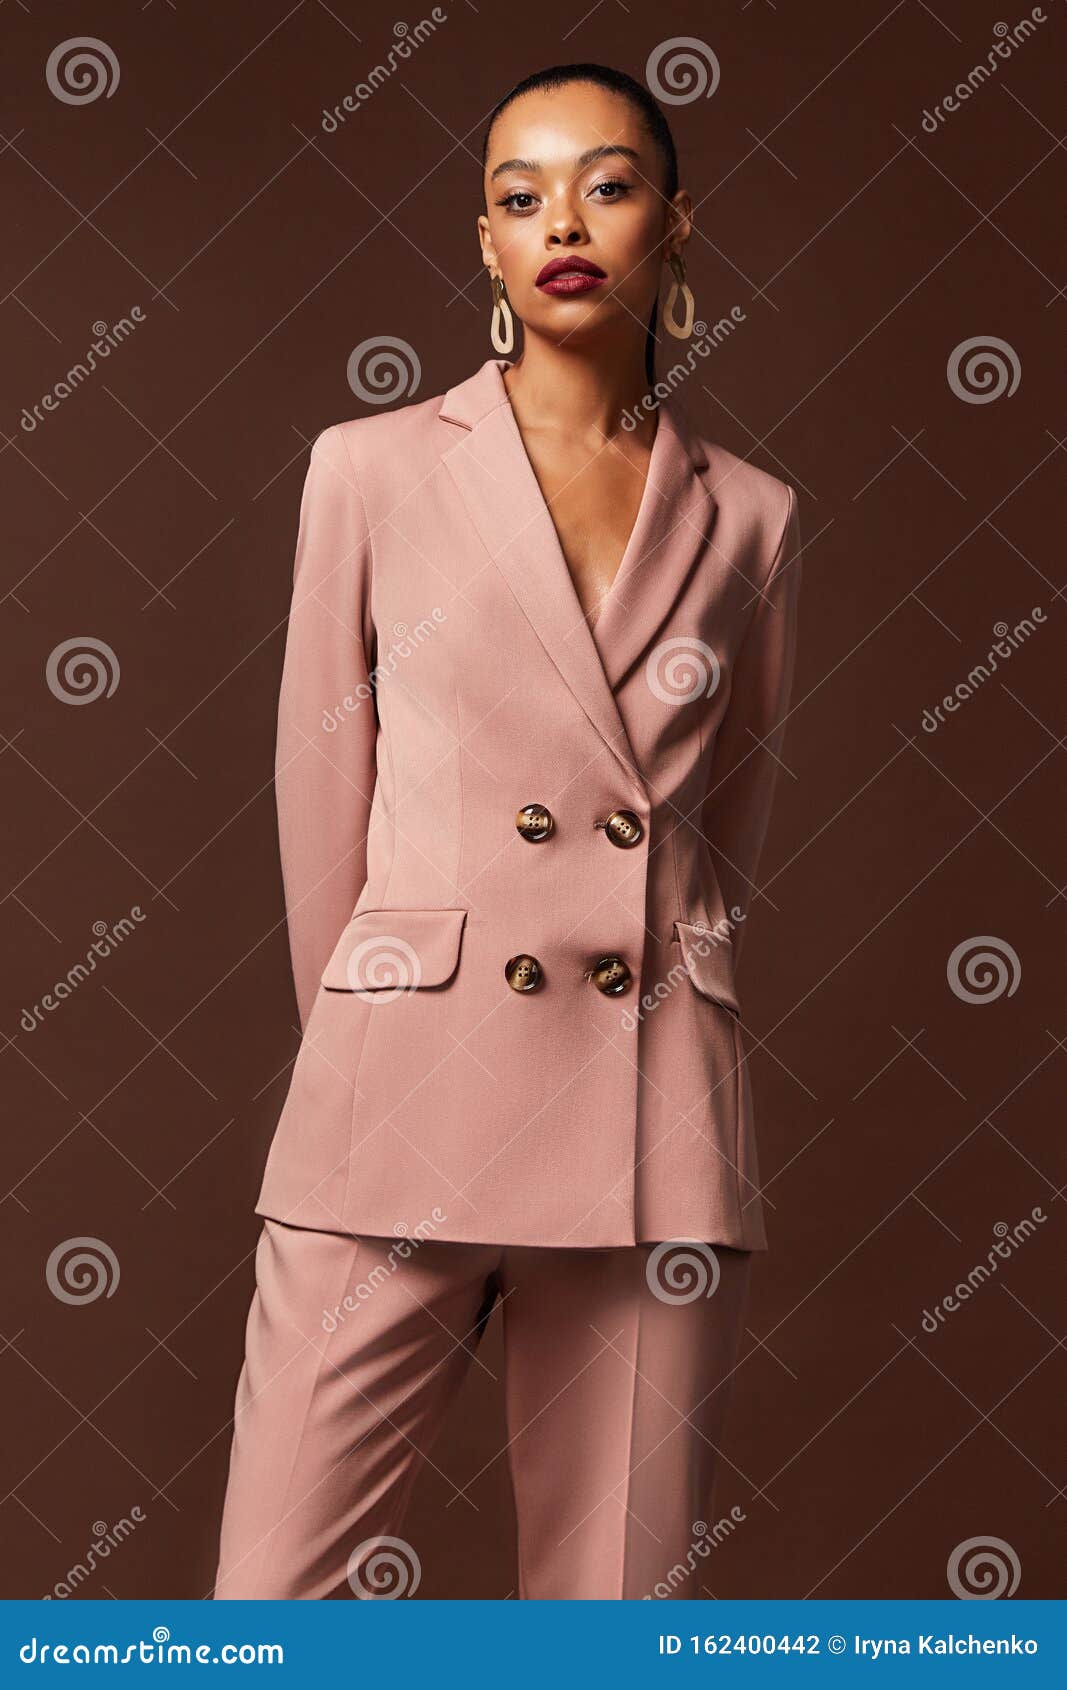 Beautiful Woman Fashion Glamour Model Brunette Hair Makeup Wear Suit  Trousers Jacket Clothes Office Dress Code Casual Party Stock Photo - Image  of hairdo, lady: 162400442